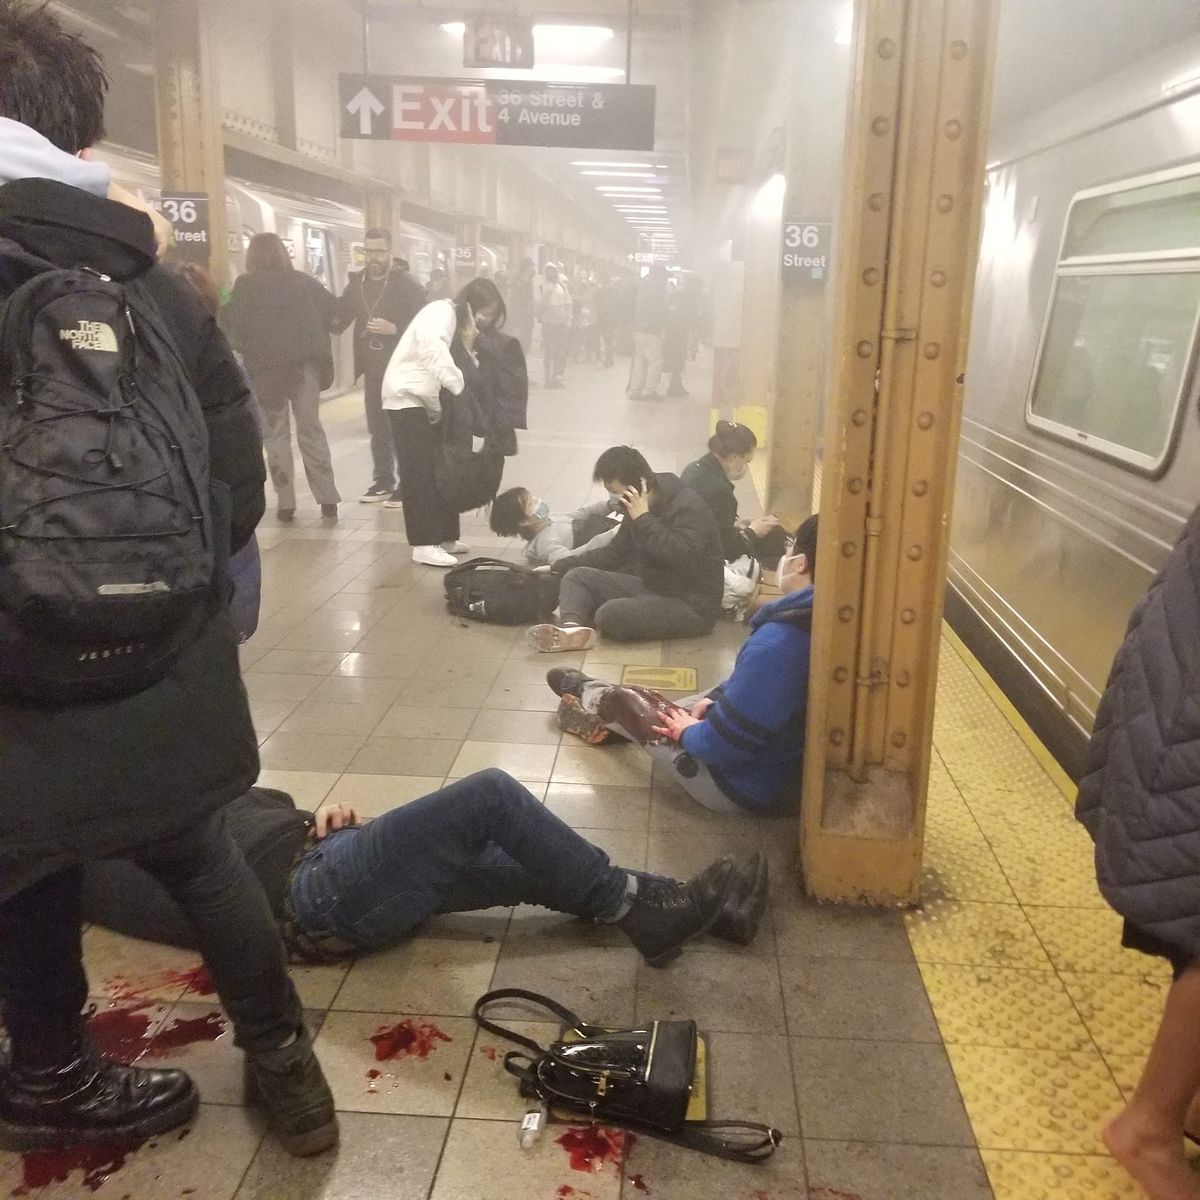 A shooting in a New York subway car leaves 23